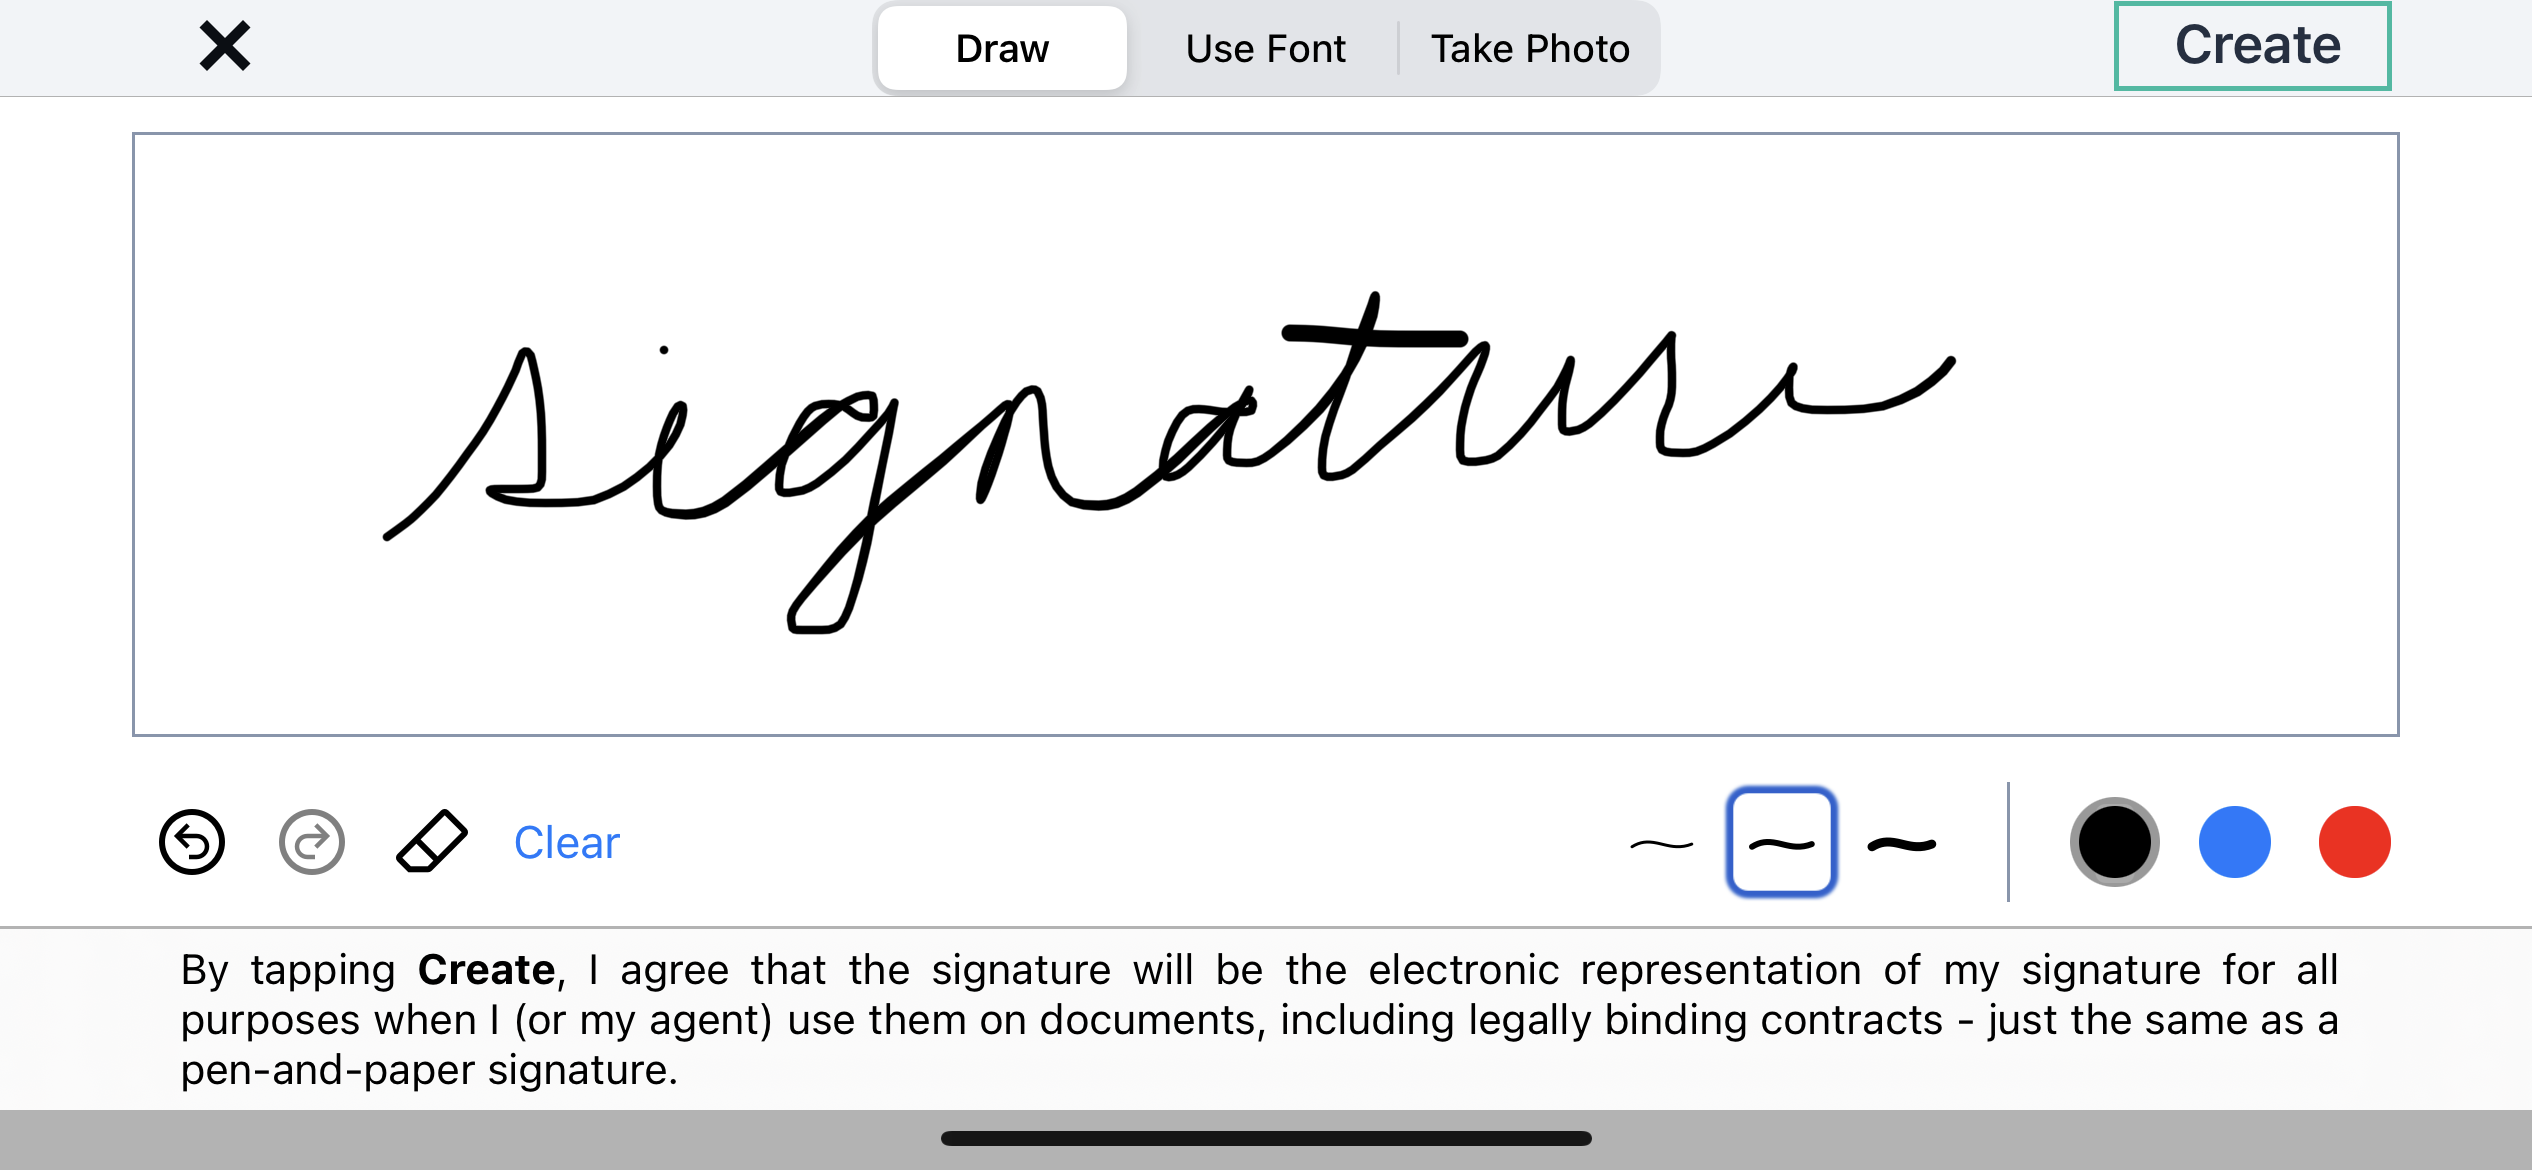 InPerson Signing with the DocuSign Mobile App for iOS (iPad, iPhone